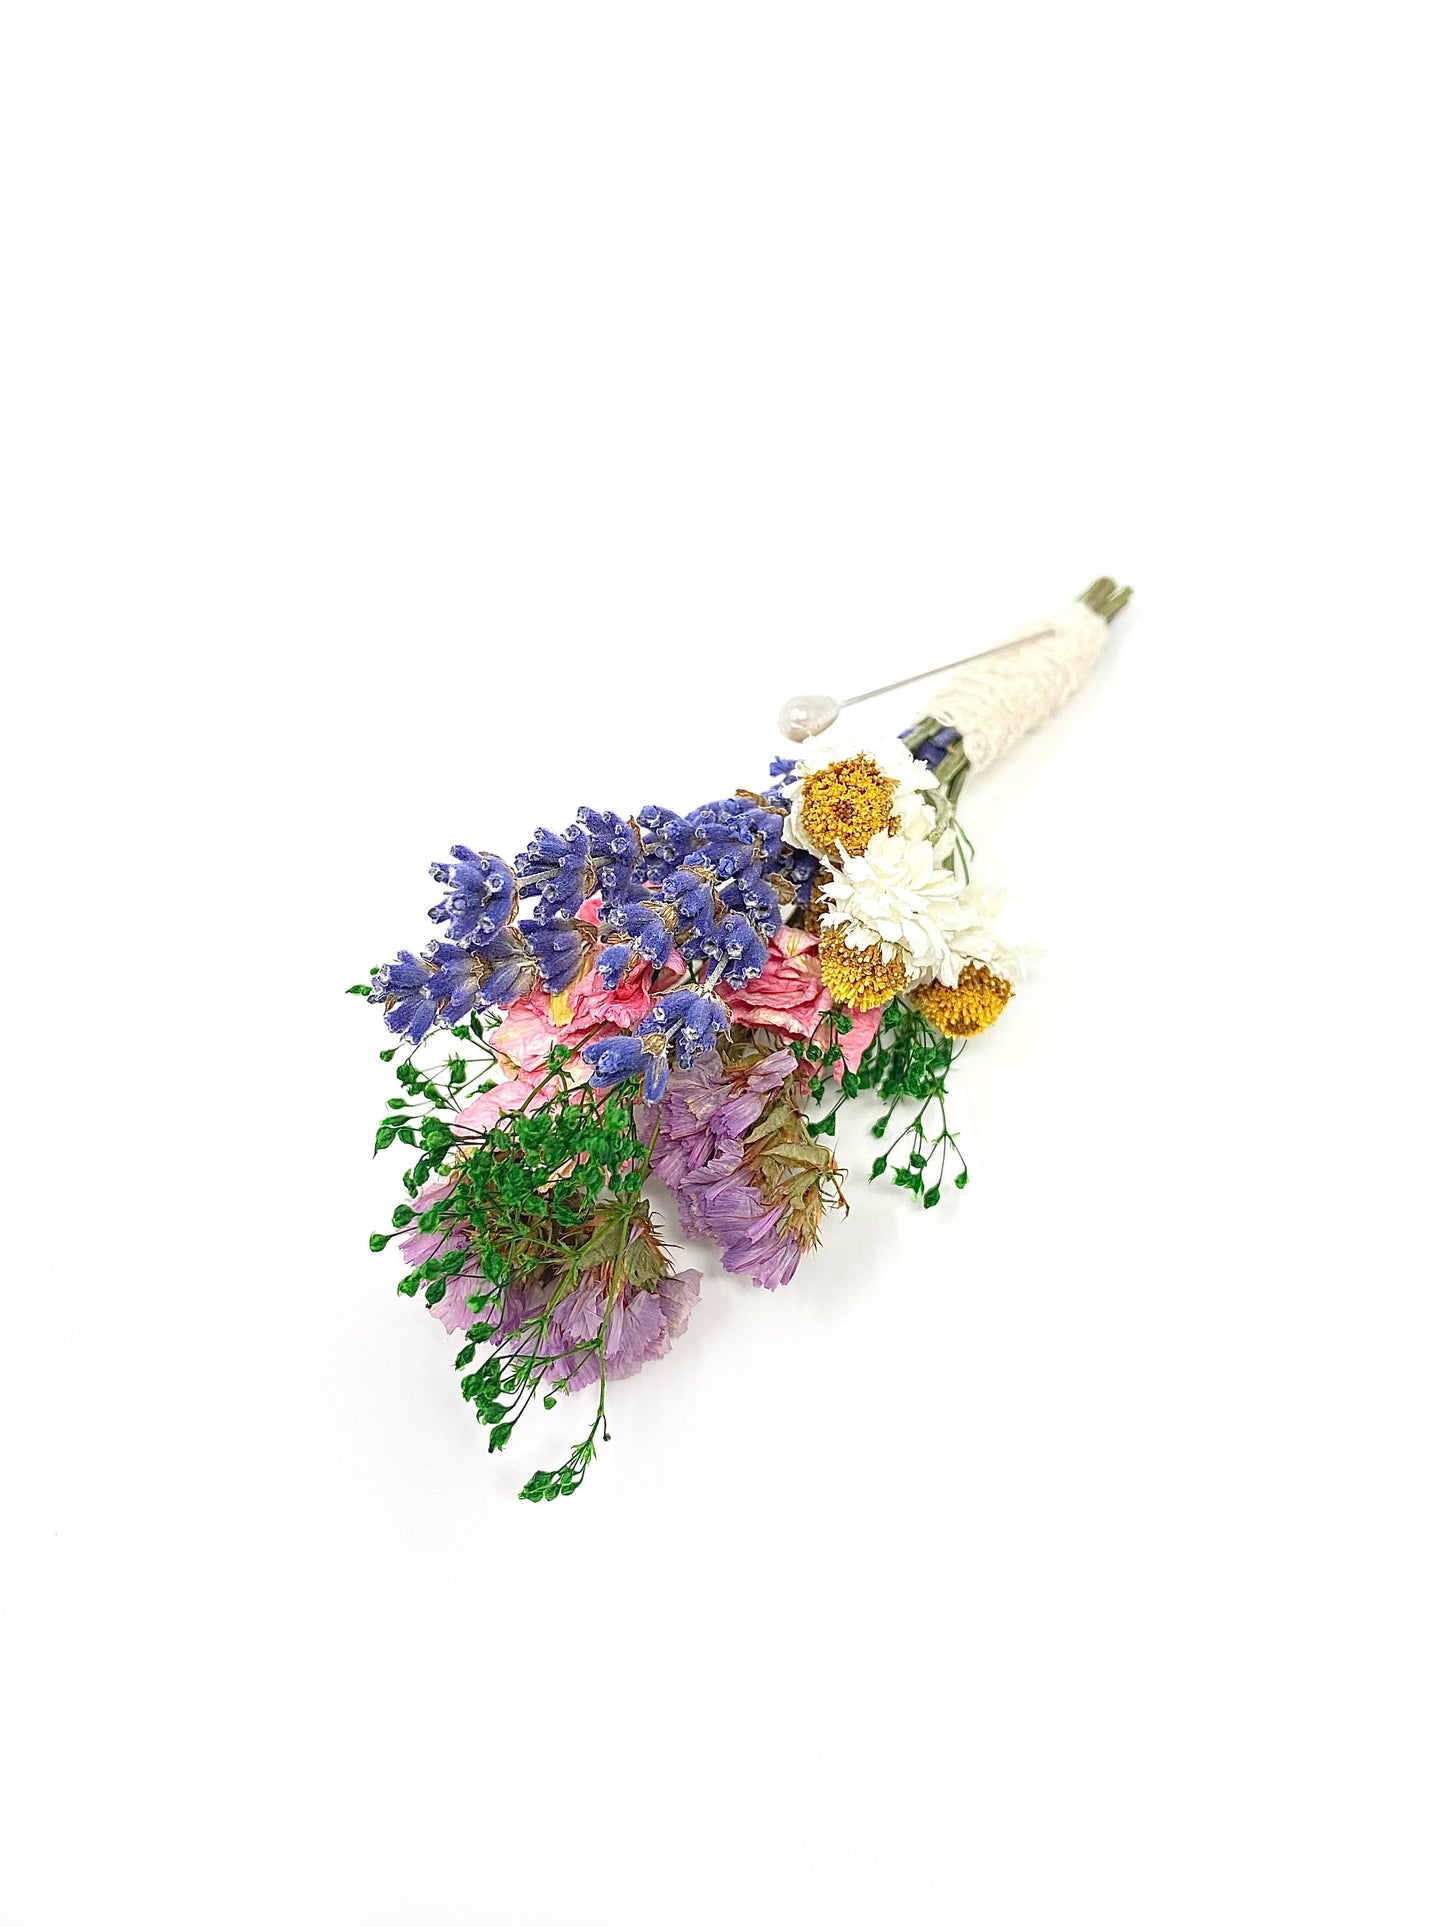 Boutonniere, Dried Flowers, Wedding Accessories, Preserved Floral, Bridal, Lavender, Decor, Purple and Pink, Ammobium